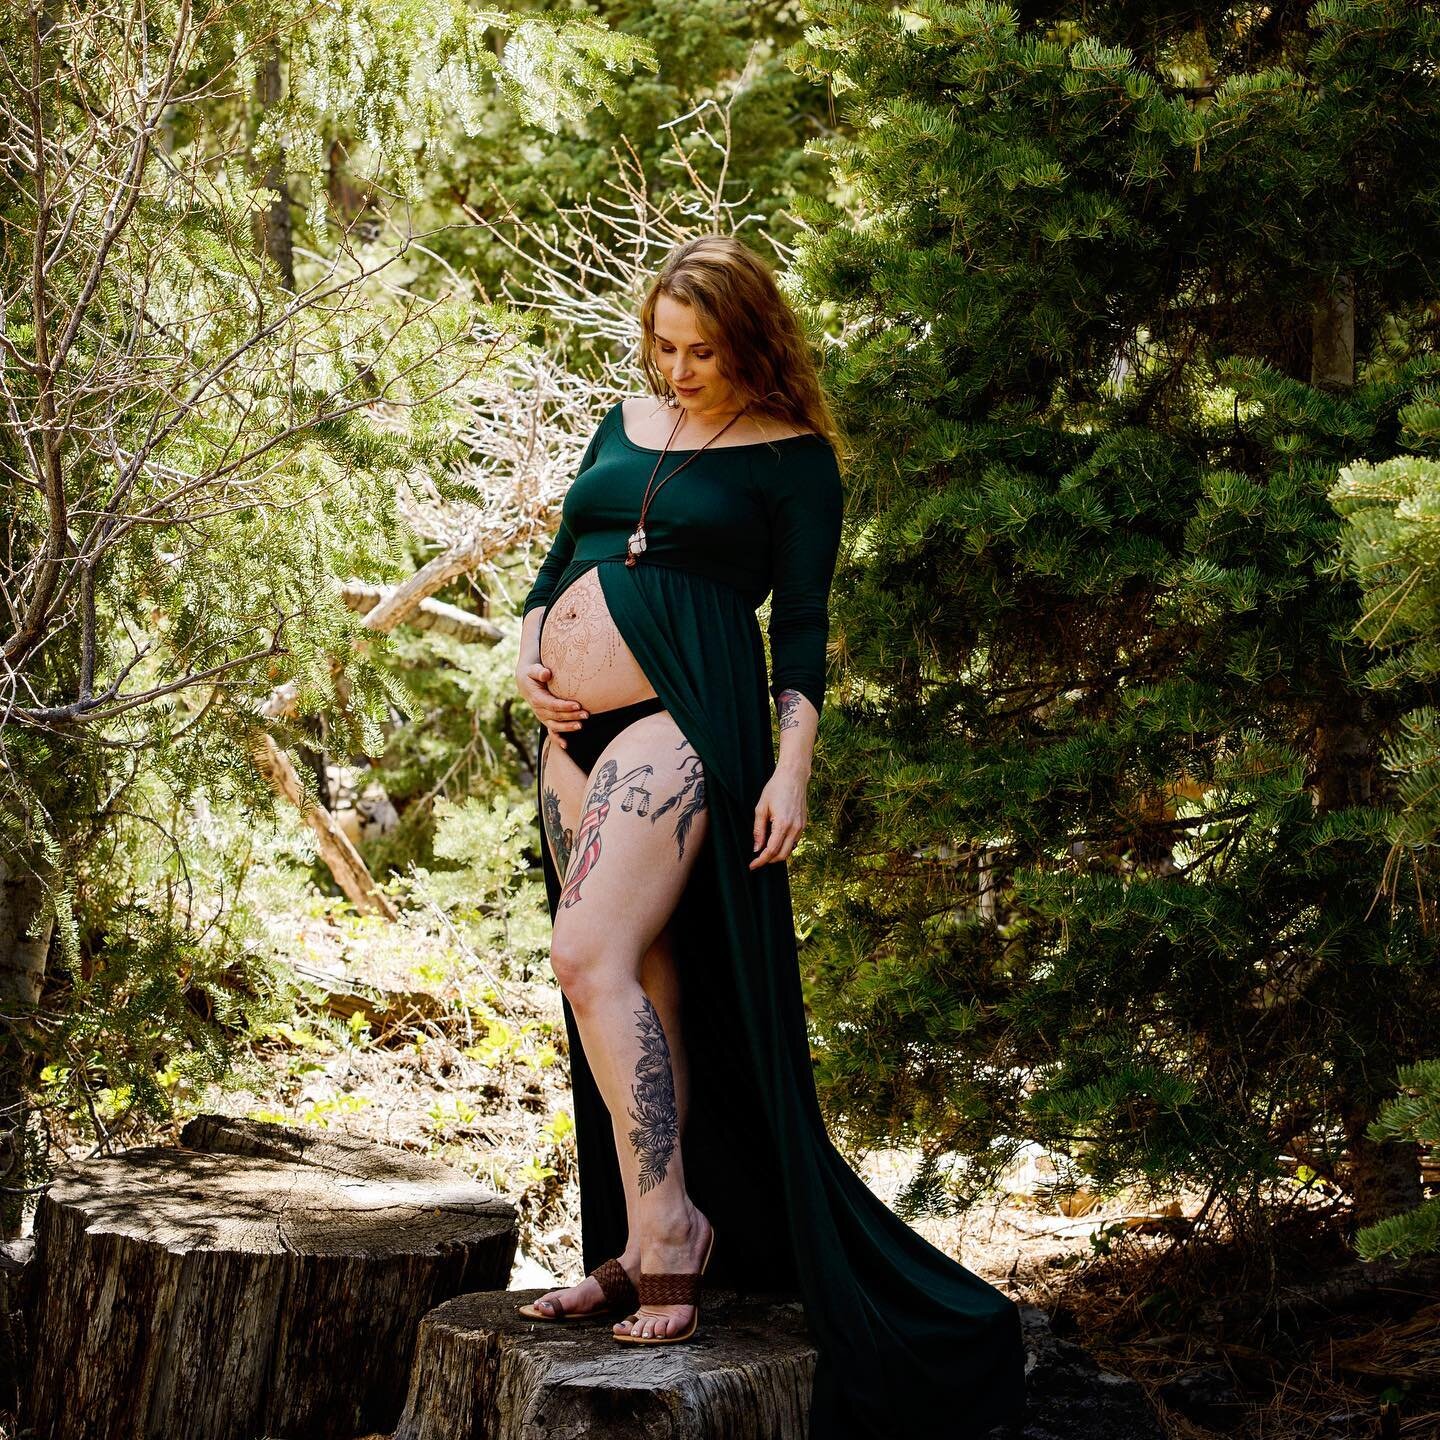 I loved being pregnant. I remember the moments when my daughter would kick or roll and I would sit there in awe and watch. And then birth came, and I felt so powerful. I created life and brought it into being, and there was no feeling in the world th